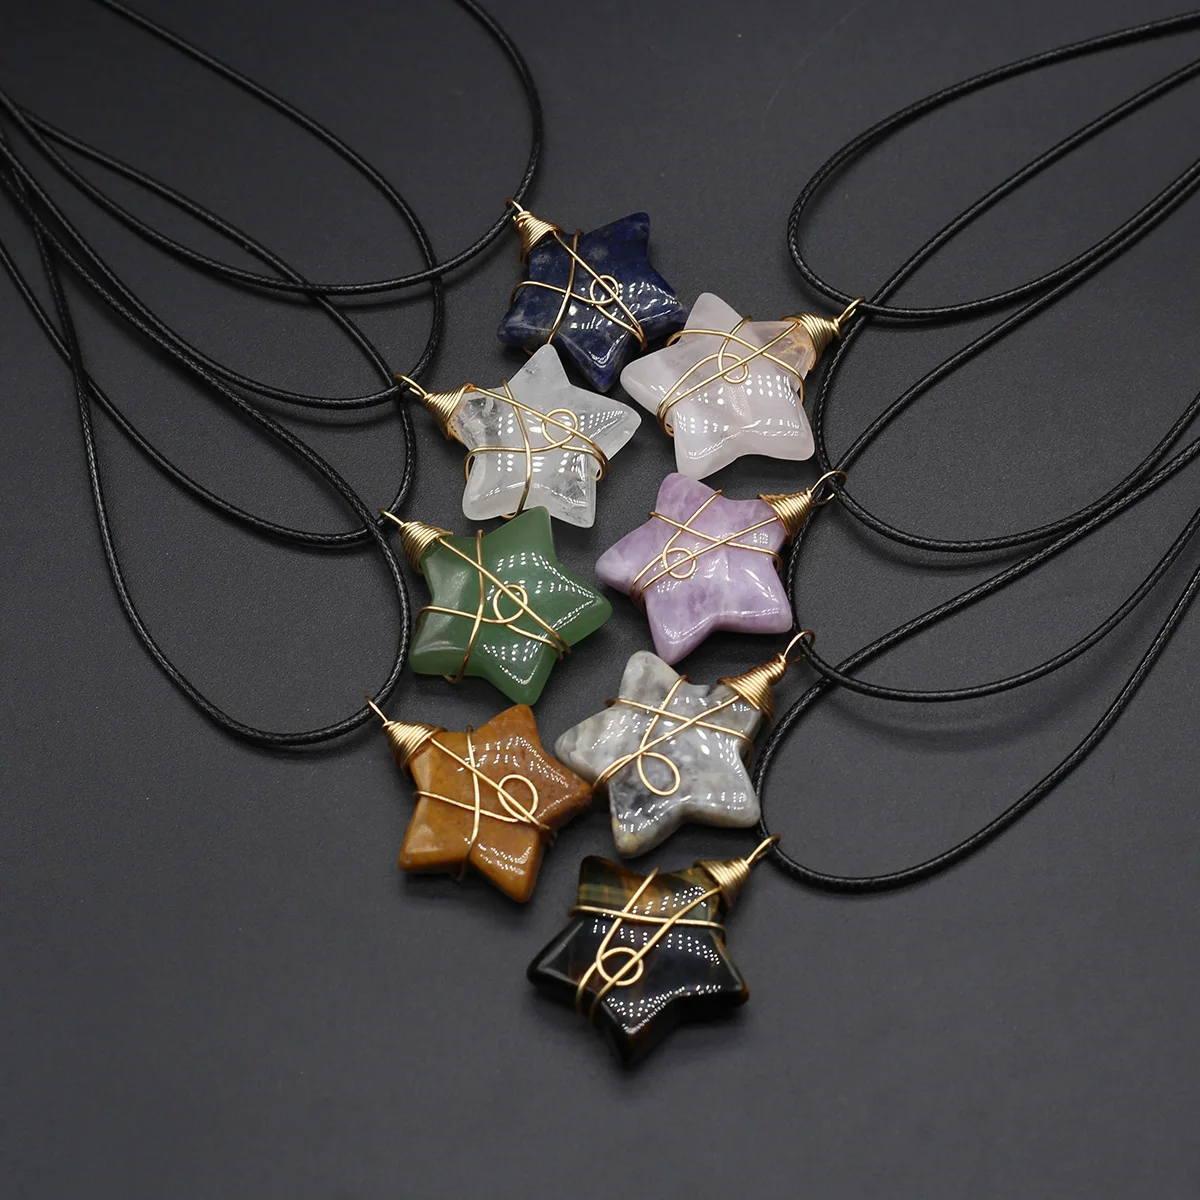 

Natural Stone Winding Star Pendant Necklace Rose Quartz Green Aventurine Jewelry for Making DIY Necklace Accessories Gifts